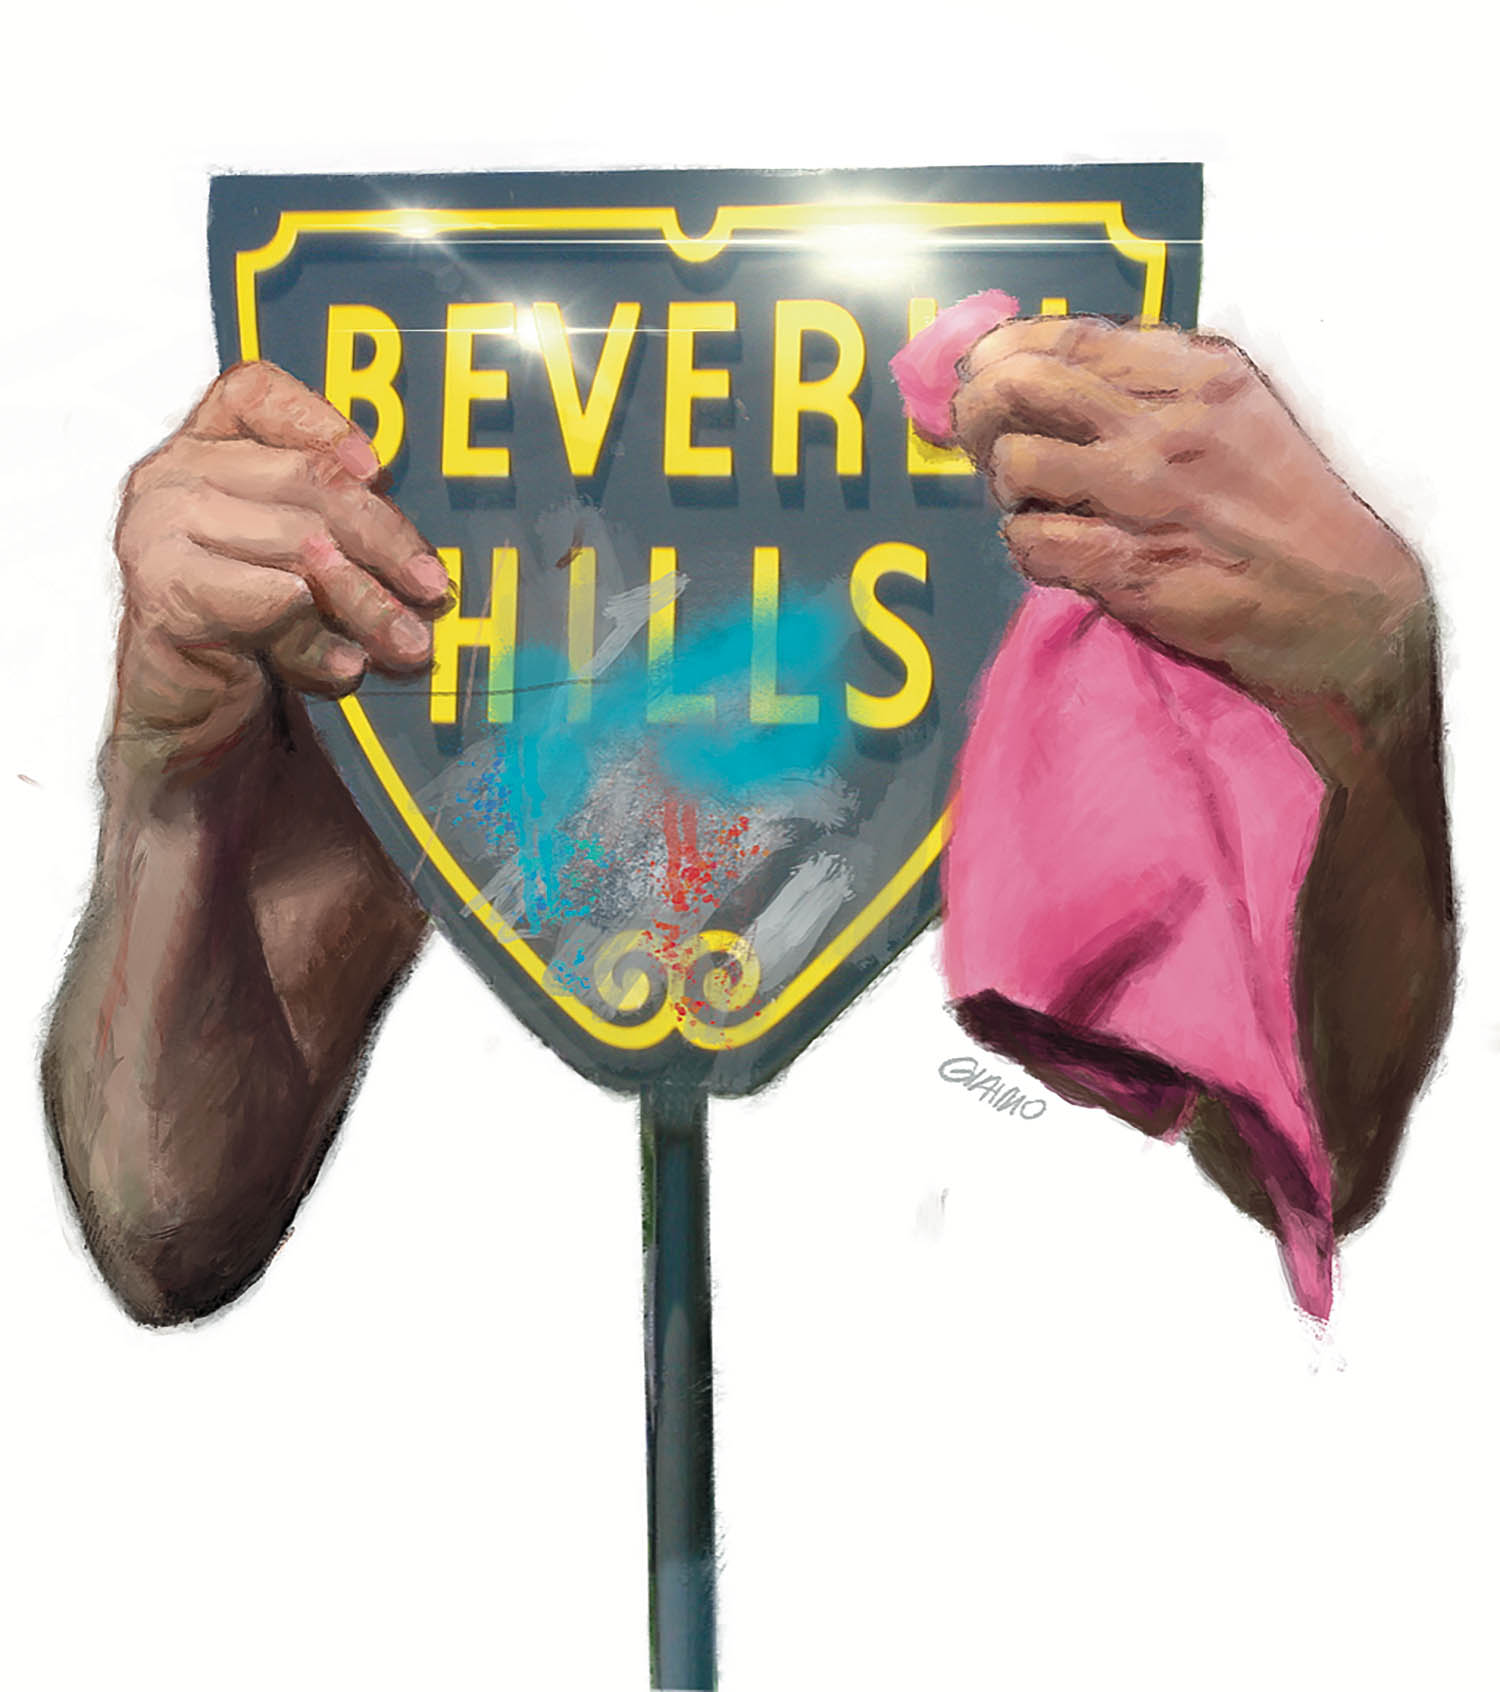 Beverly Hills City Council gives final sign off to Cheval Blanc